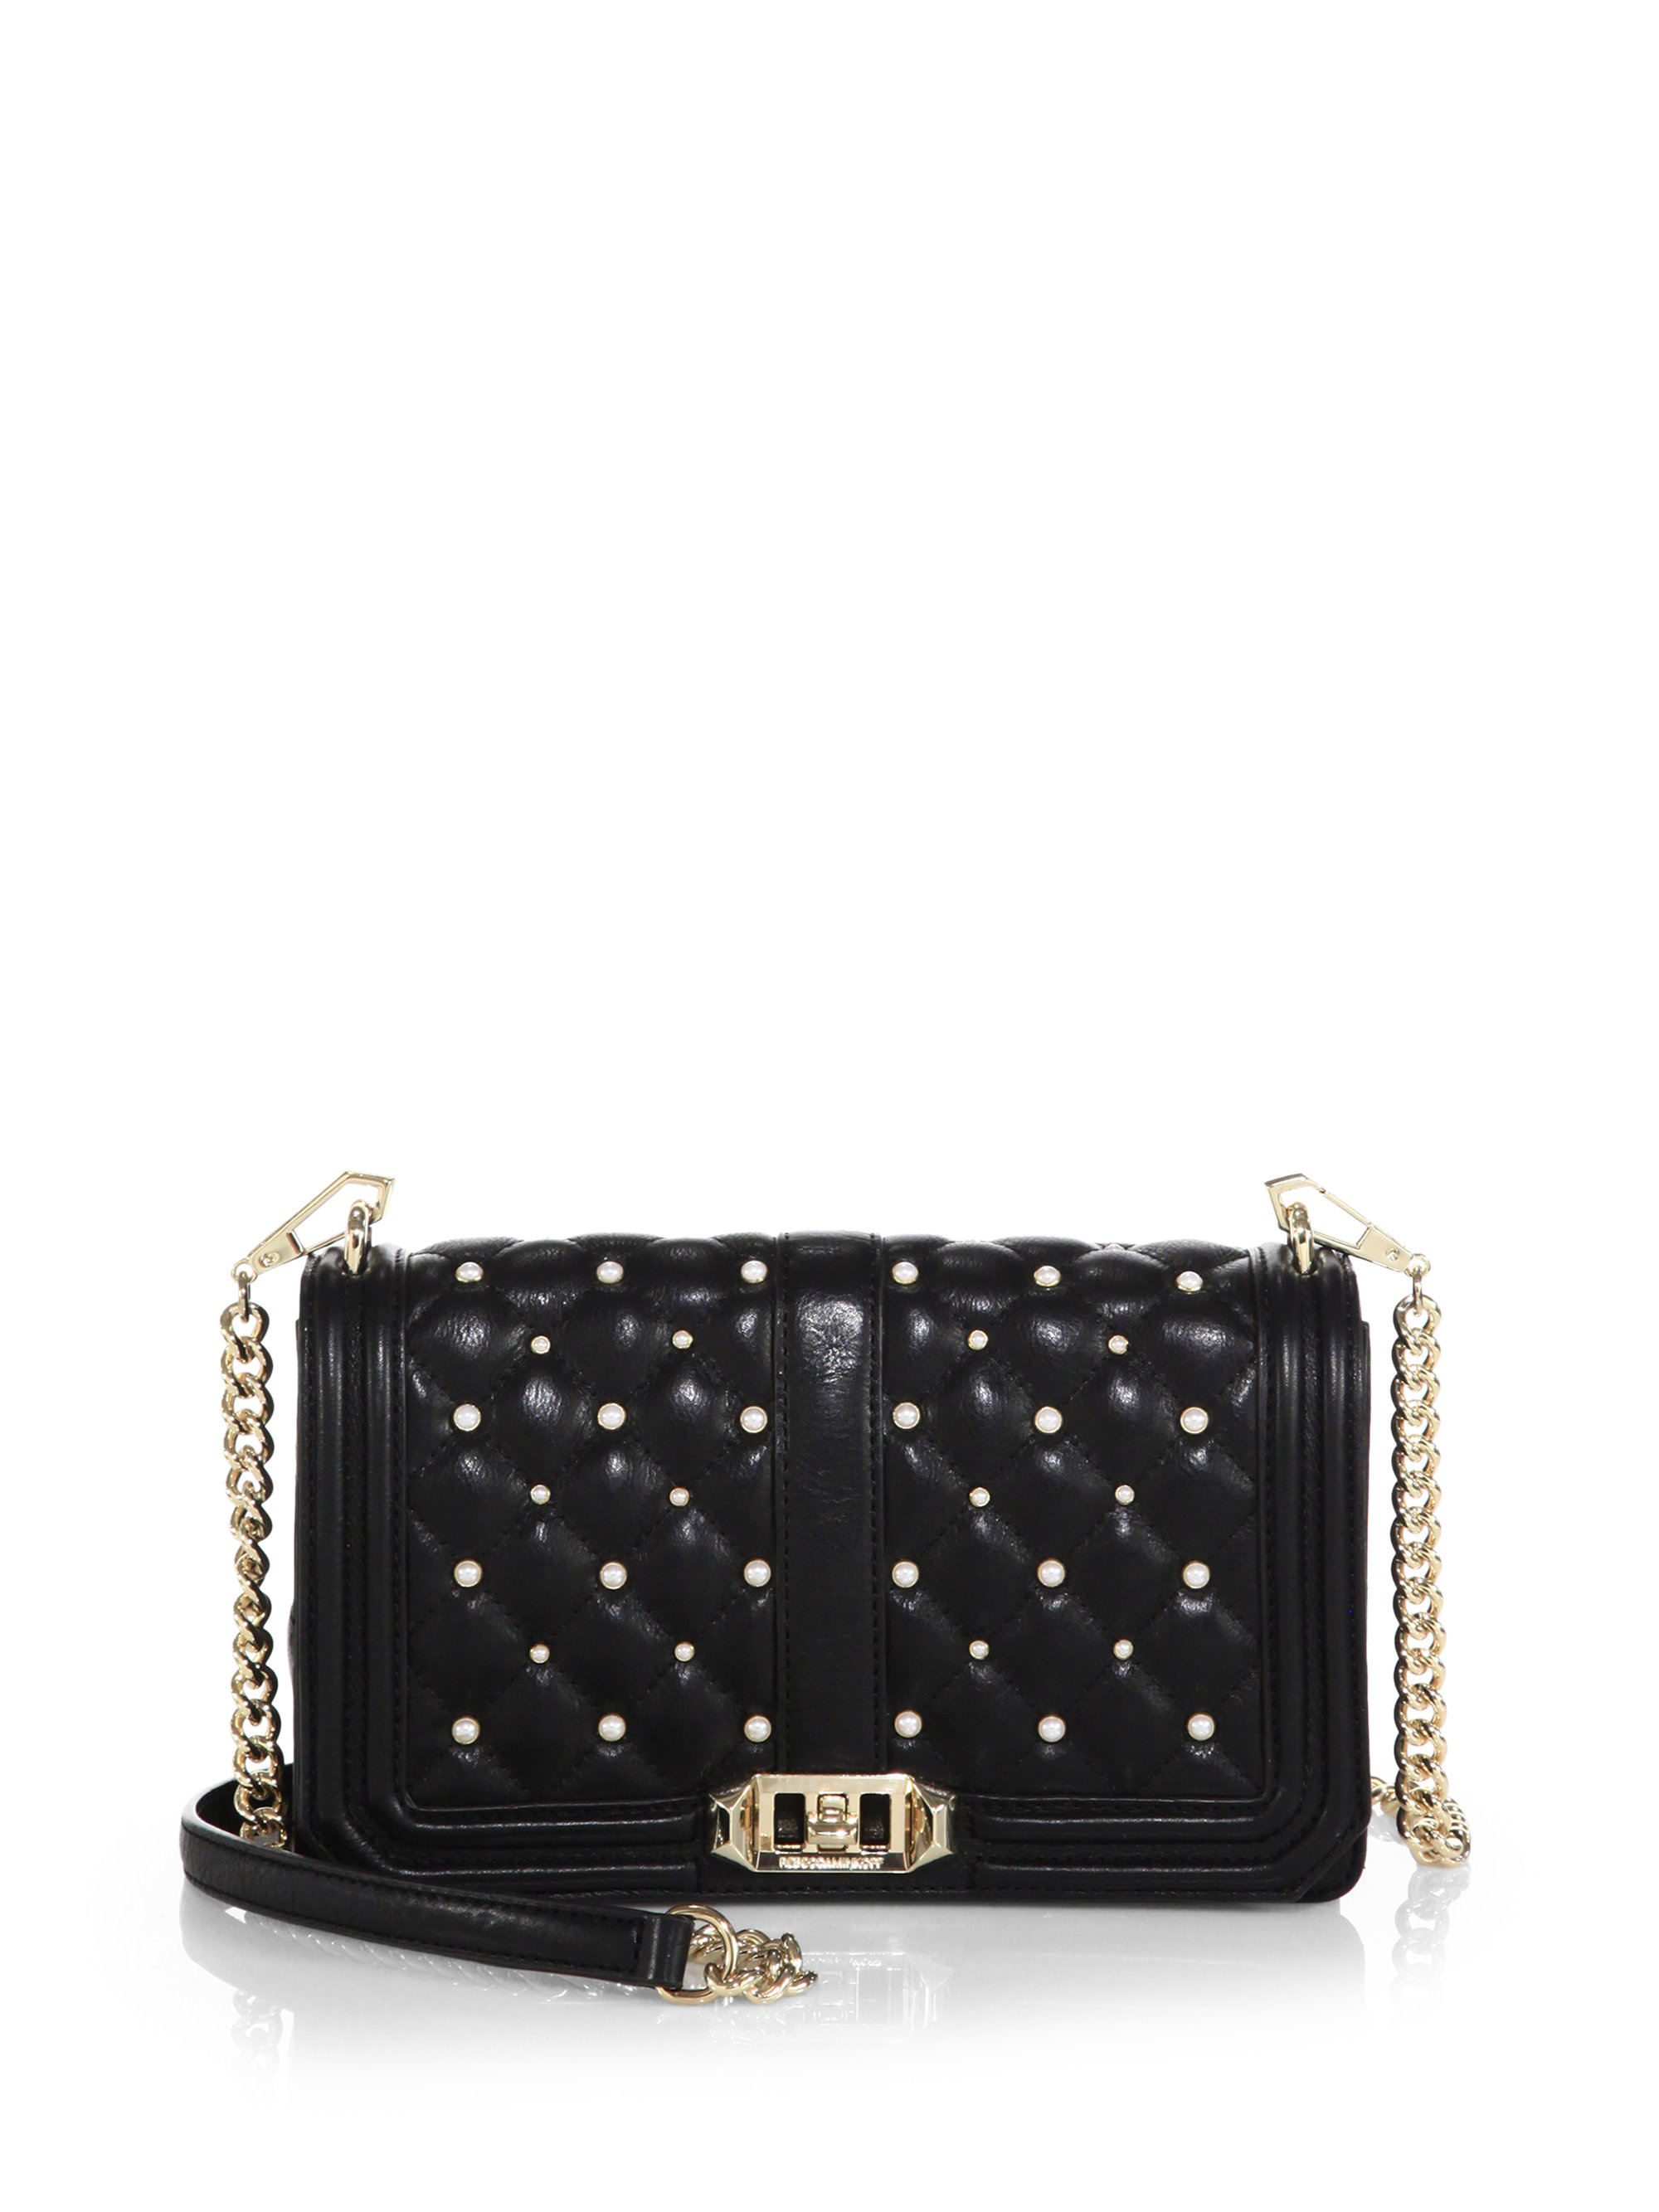 Lyst - Rebecca Minkoff Love Crossbody Bag with Pearlescent Studs in Black